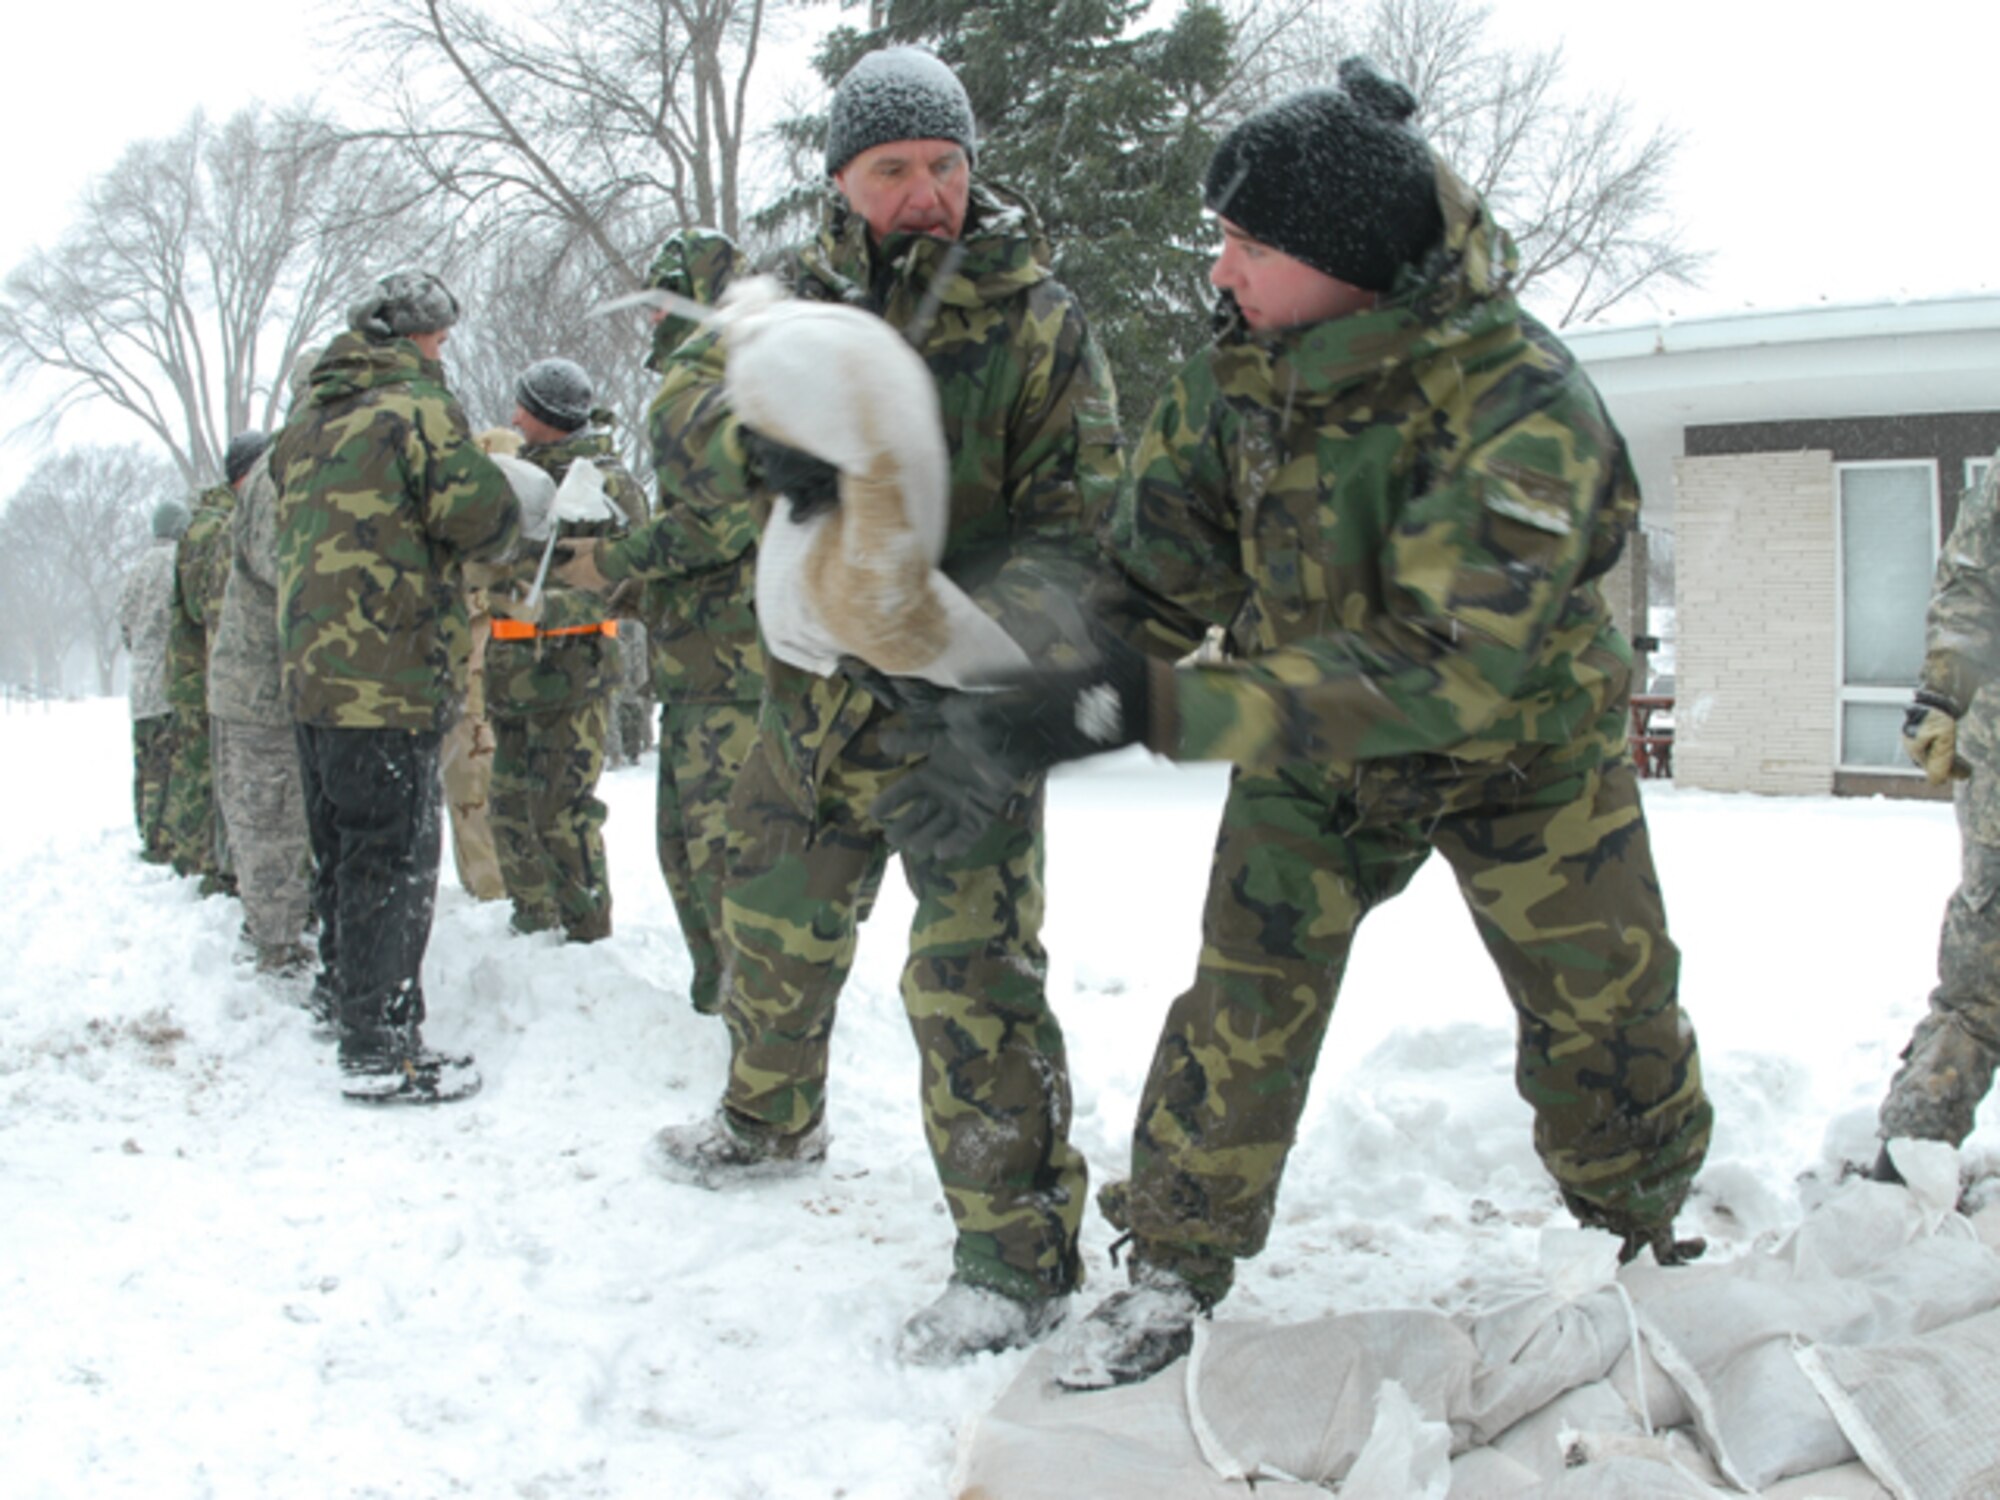 North Dakota National Guardsmen work on flood duty to combat the rising Red River in Fargo, North Dakota.  Over 3,000 soldiers and airmen from North Dakota and surrounding states work together to keep the state safe.  